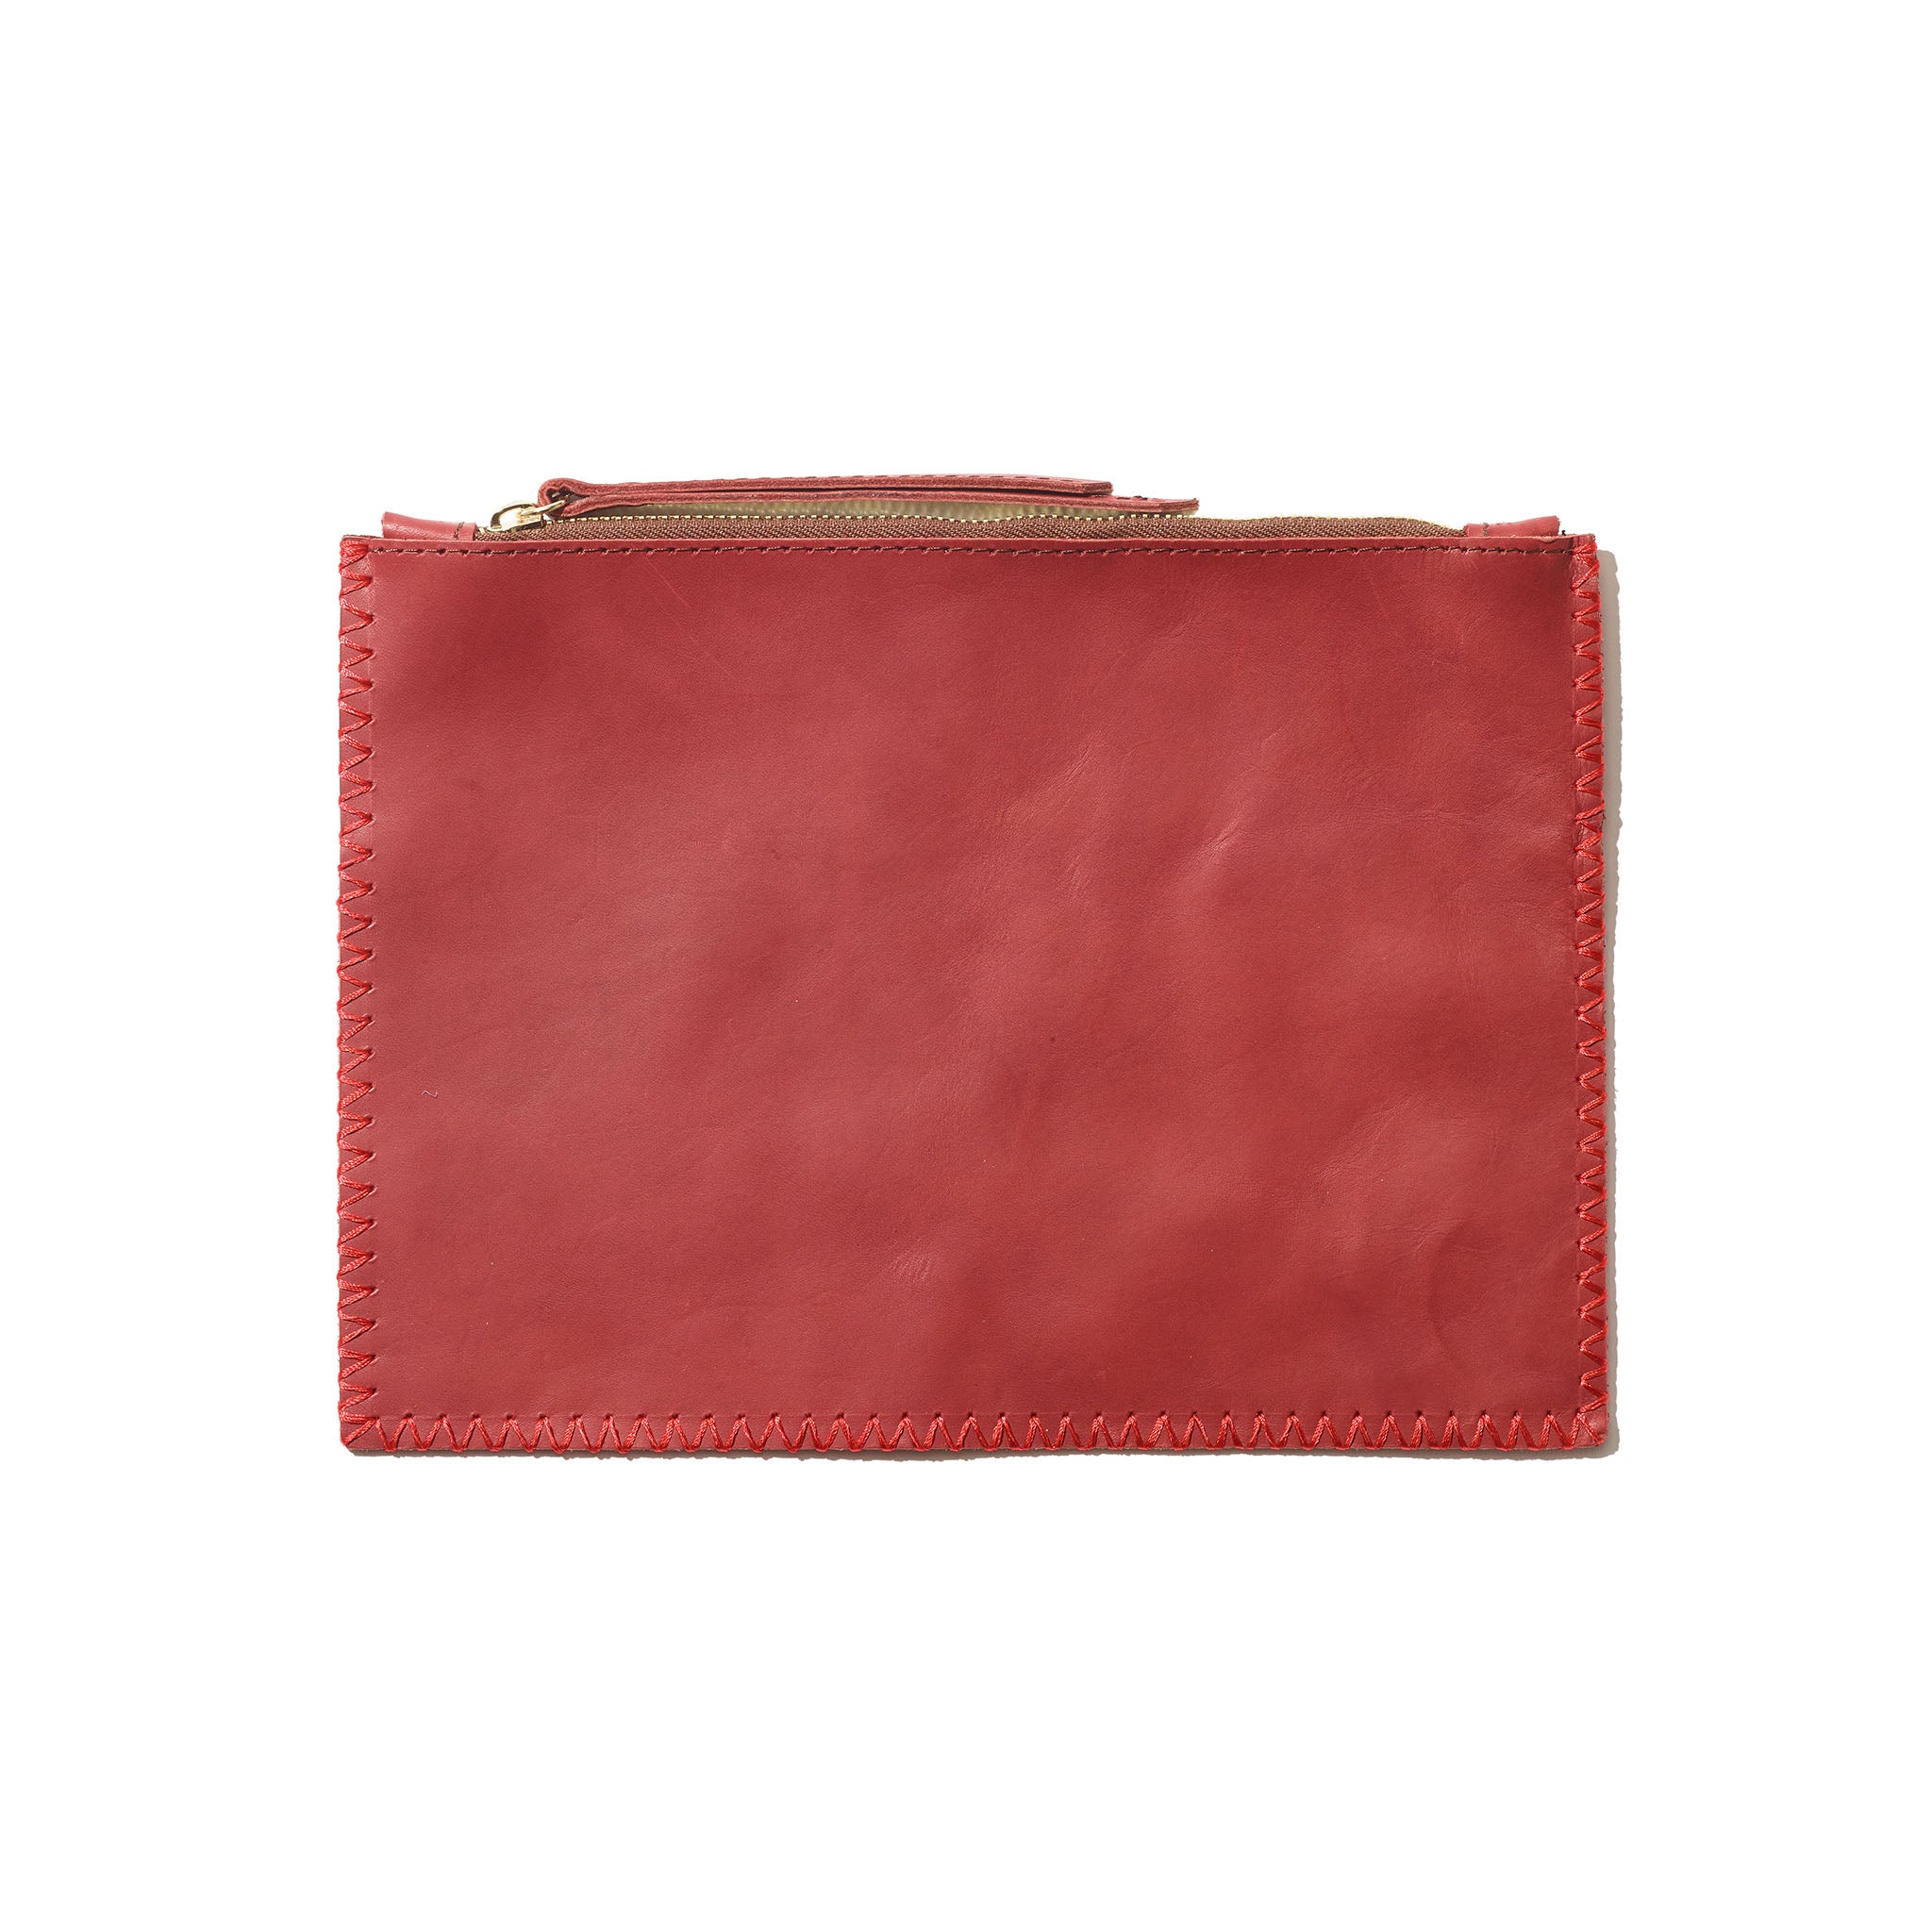 An red pouch with understated contrast stitching, handcrafted from sustainable leather.